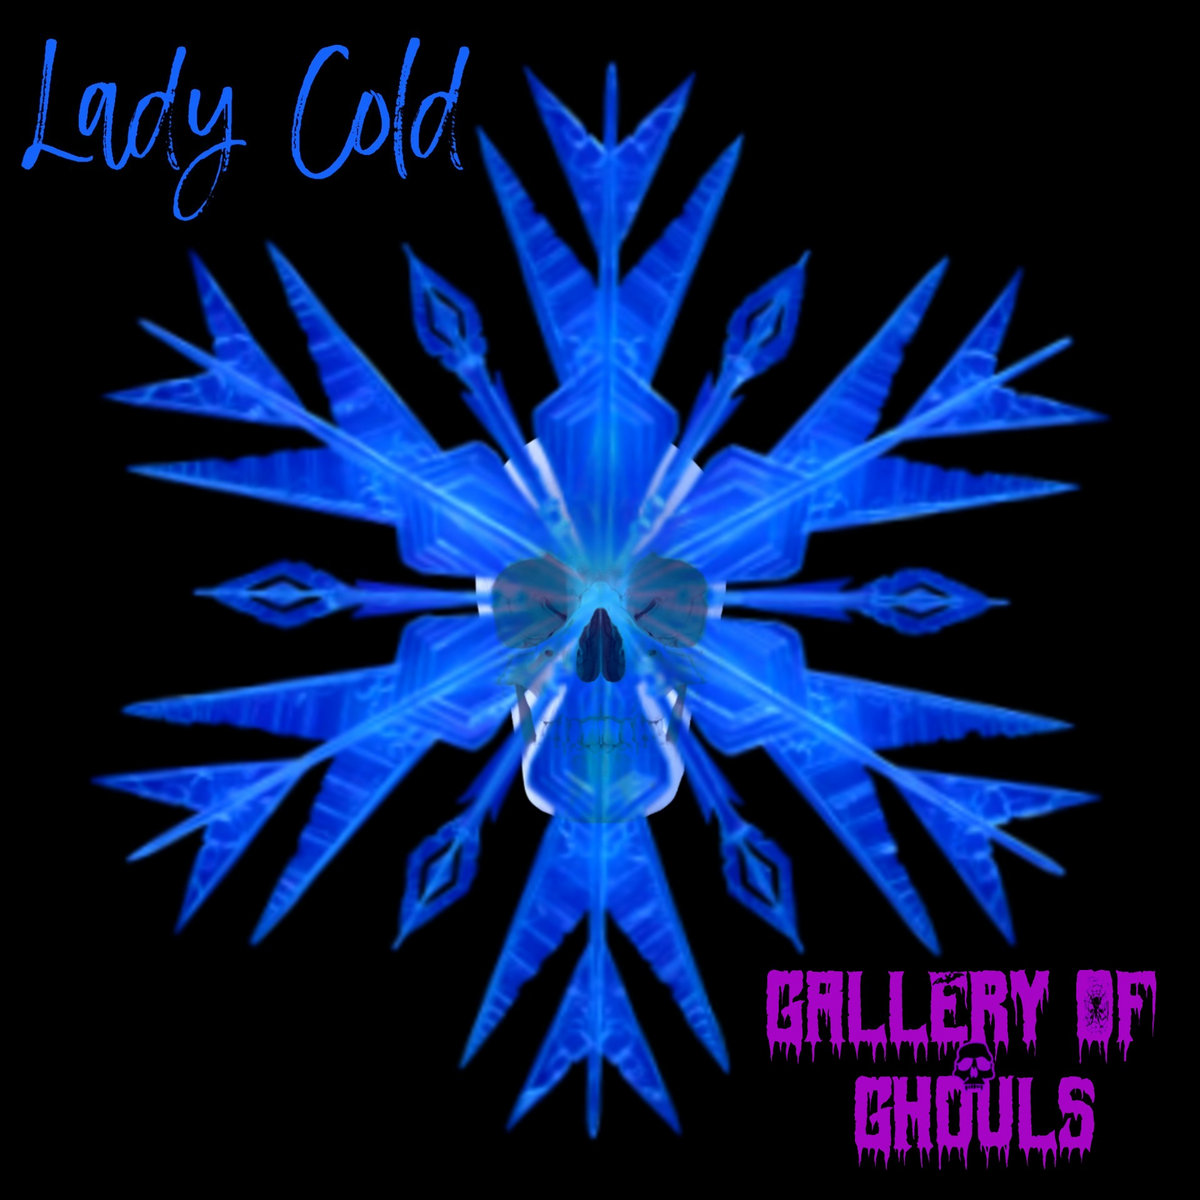 GALLERY OF GHOULS - Lady Cold cover 